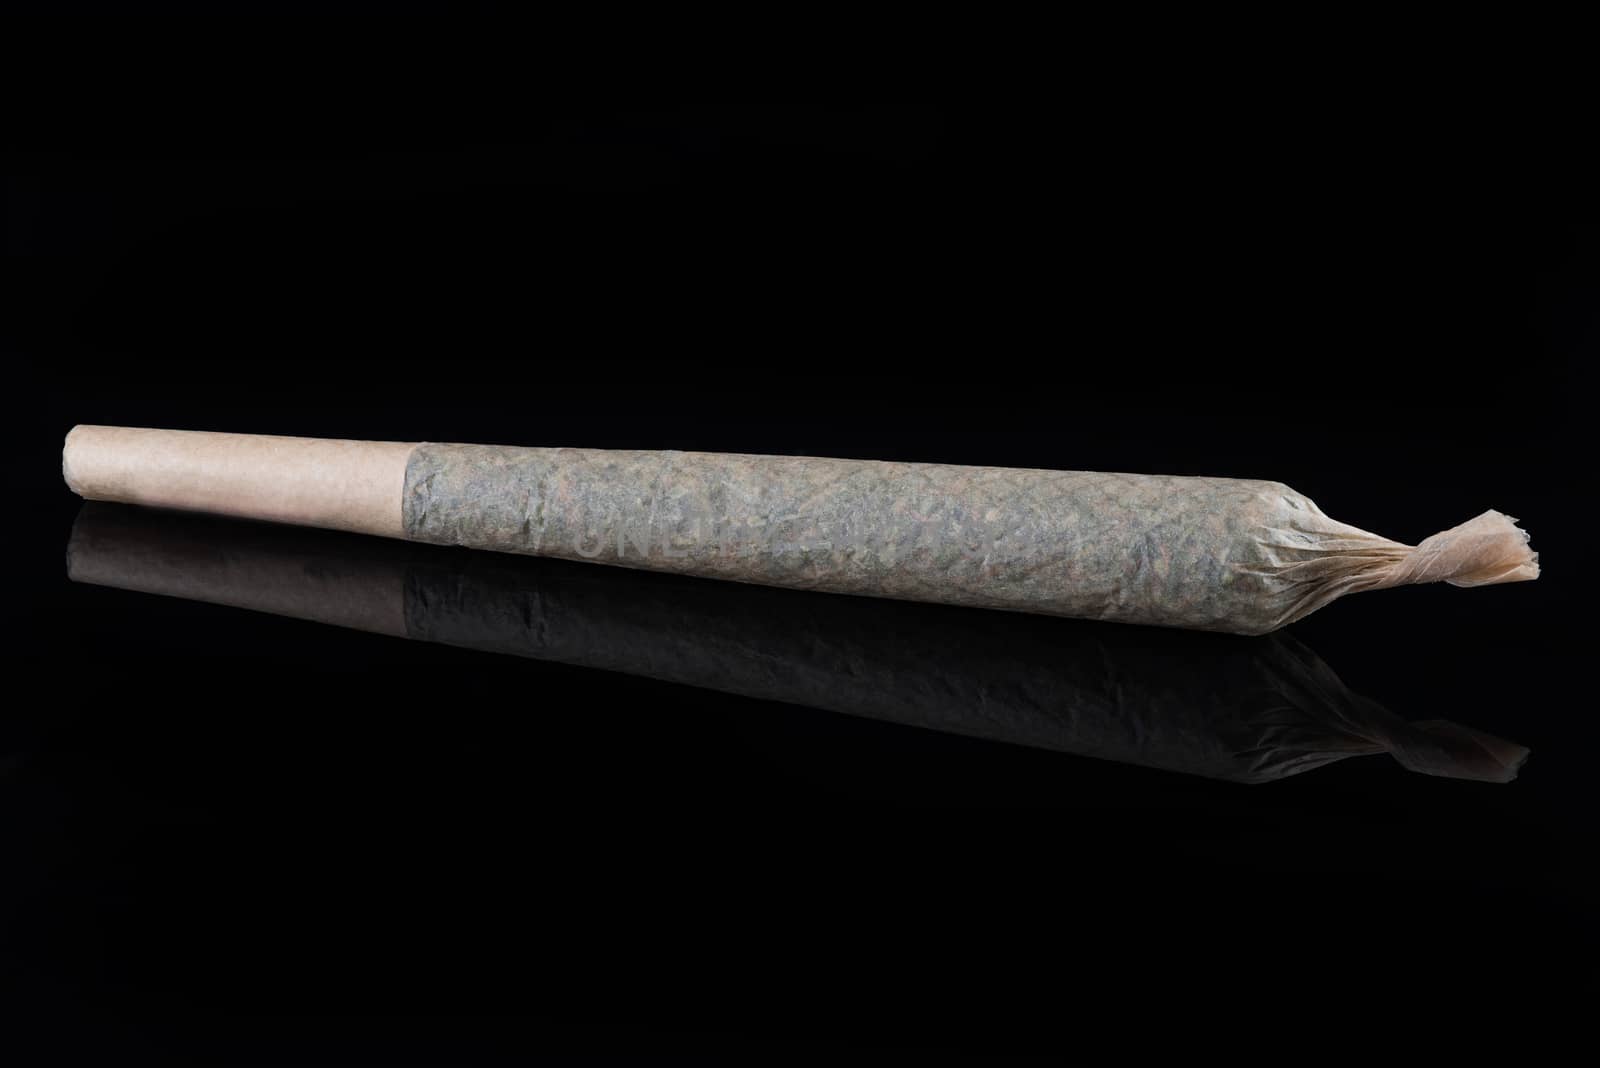 MEdical Marijuana Rolled Up Joint on Dark Background with Reflection.